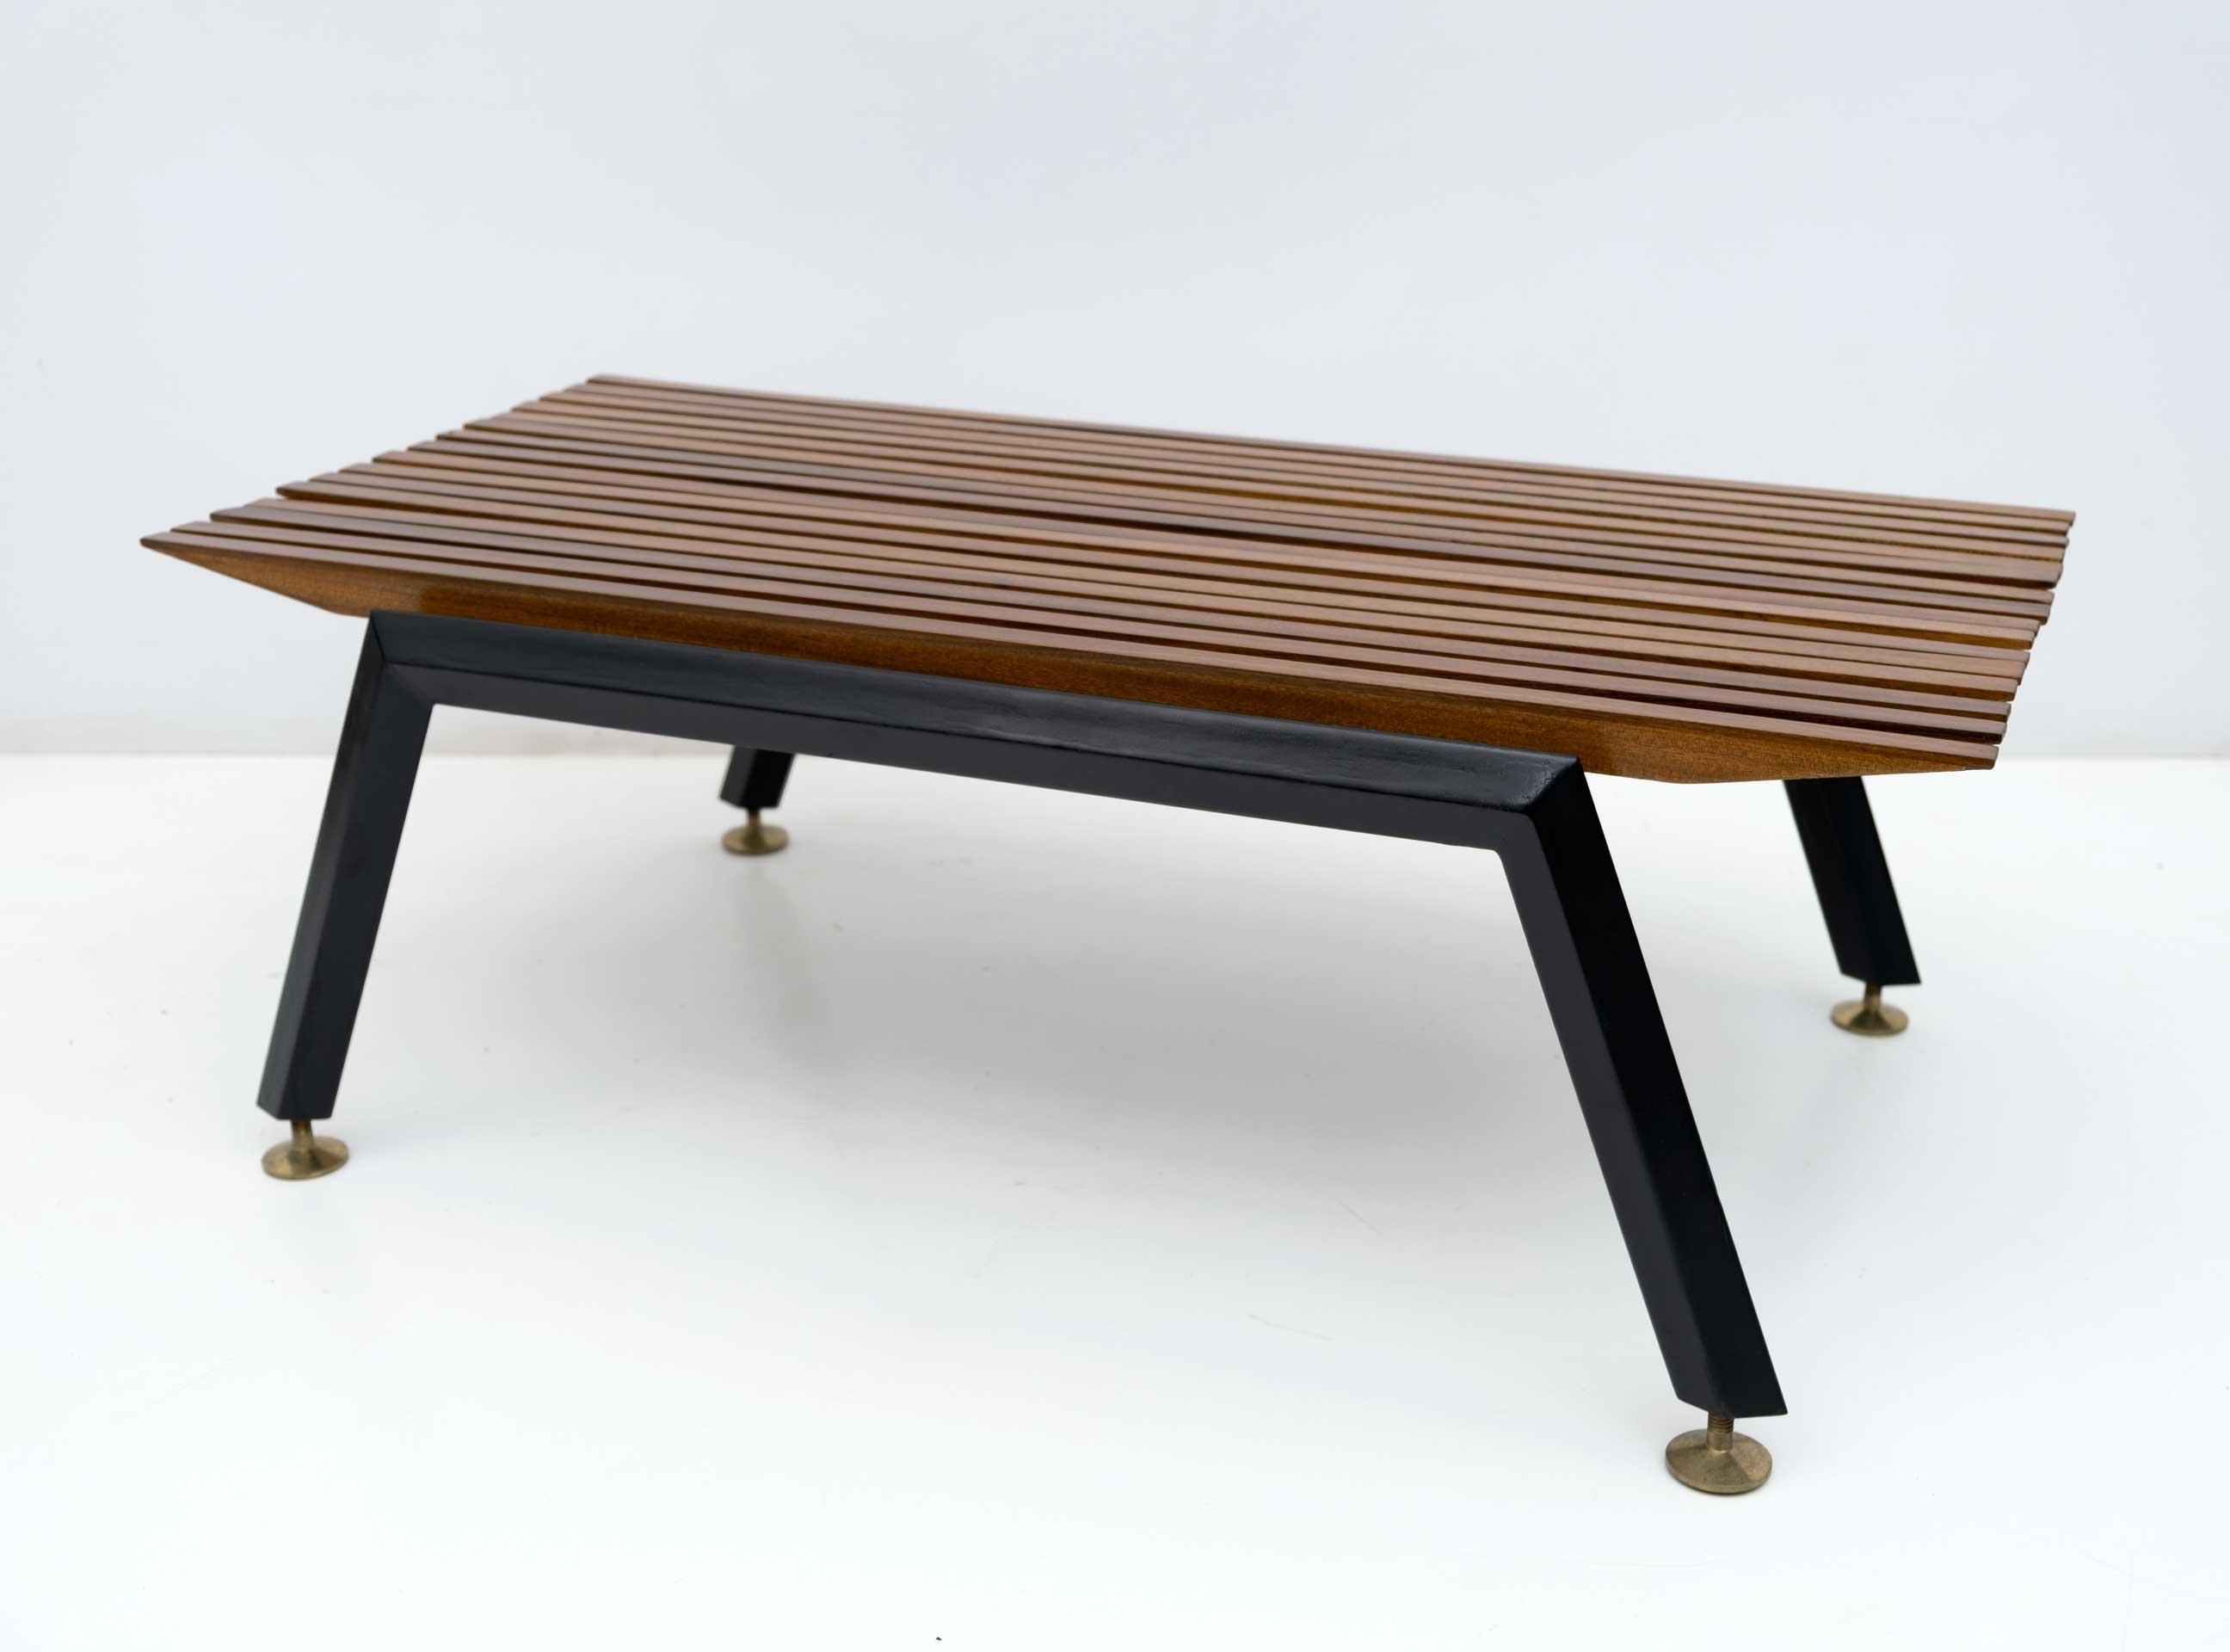 Slatted coffee table, in wood and metal with brass feet, Italian production in the 1950s, completely restored.